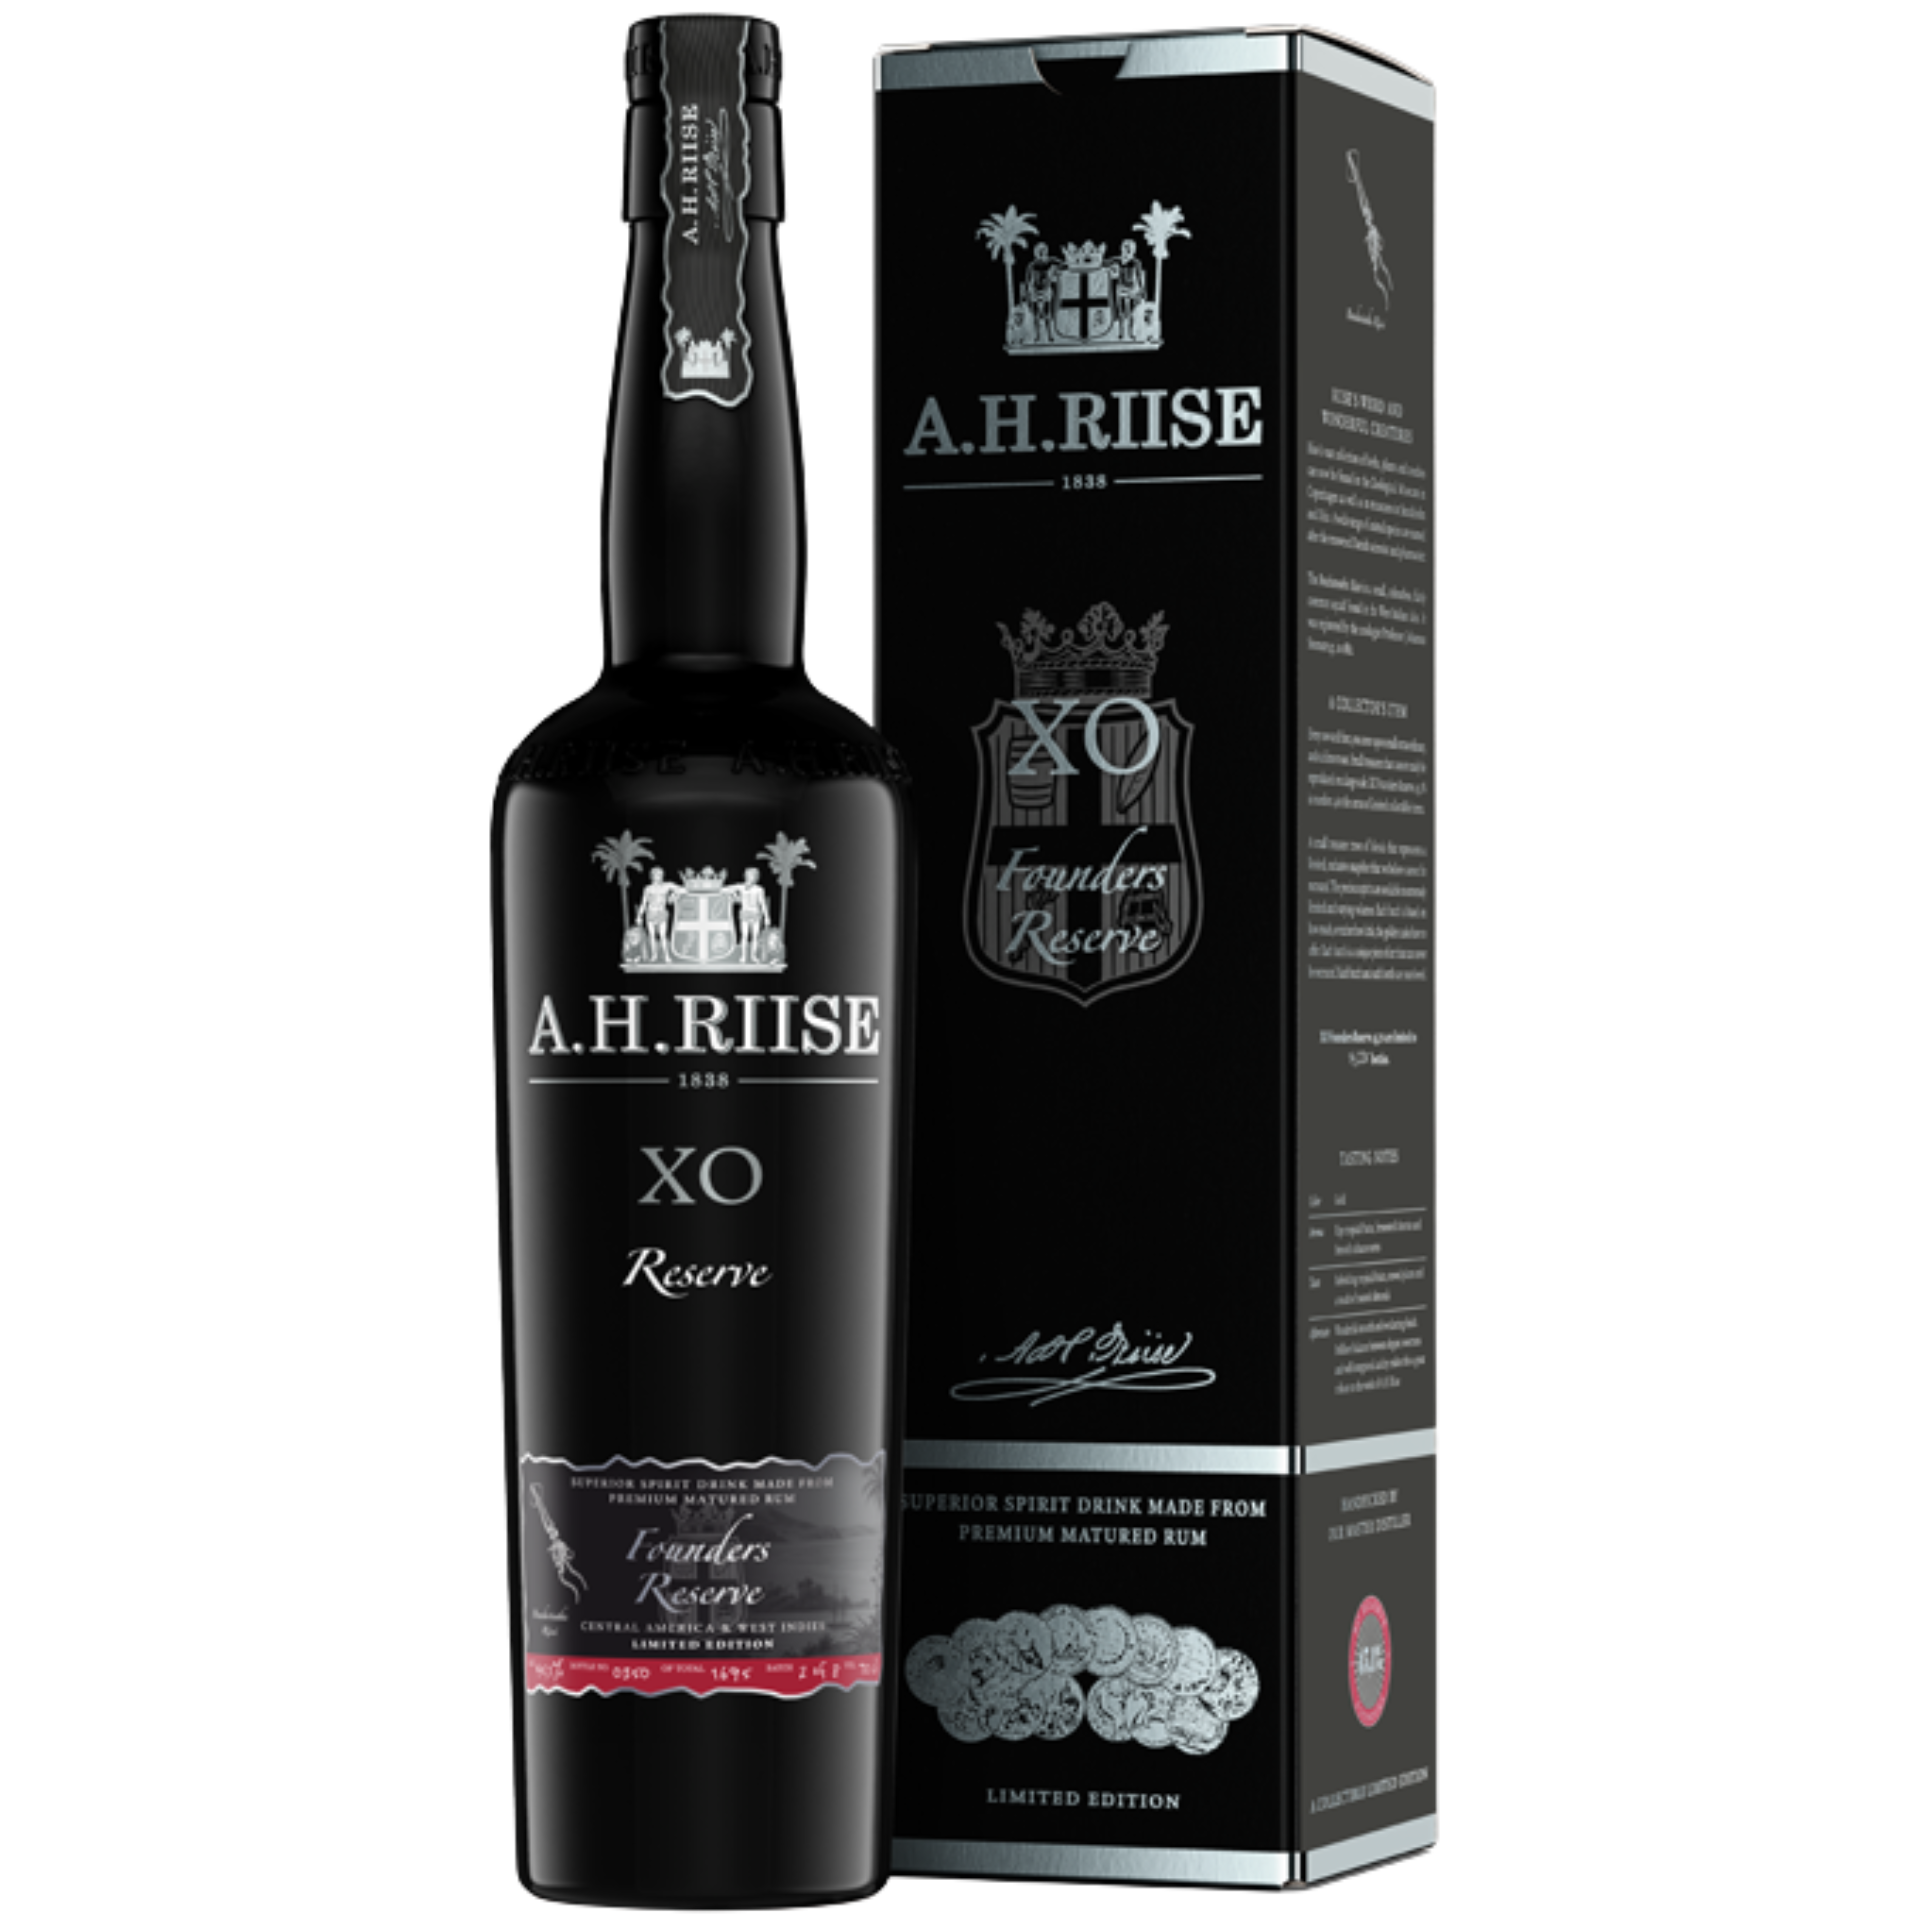 A.H. Riise Black XO Founders Reserve 4th Edition (Rum-Basis) 45,10% 0,7l